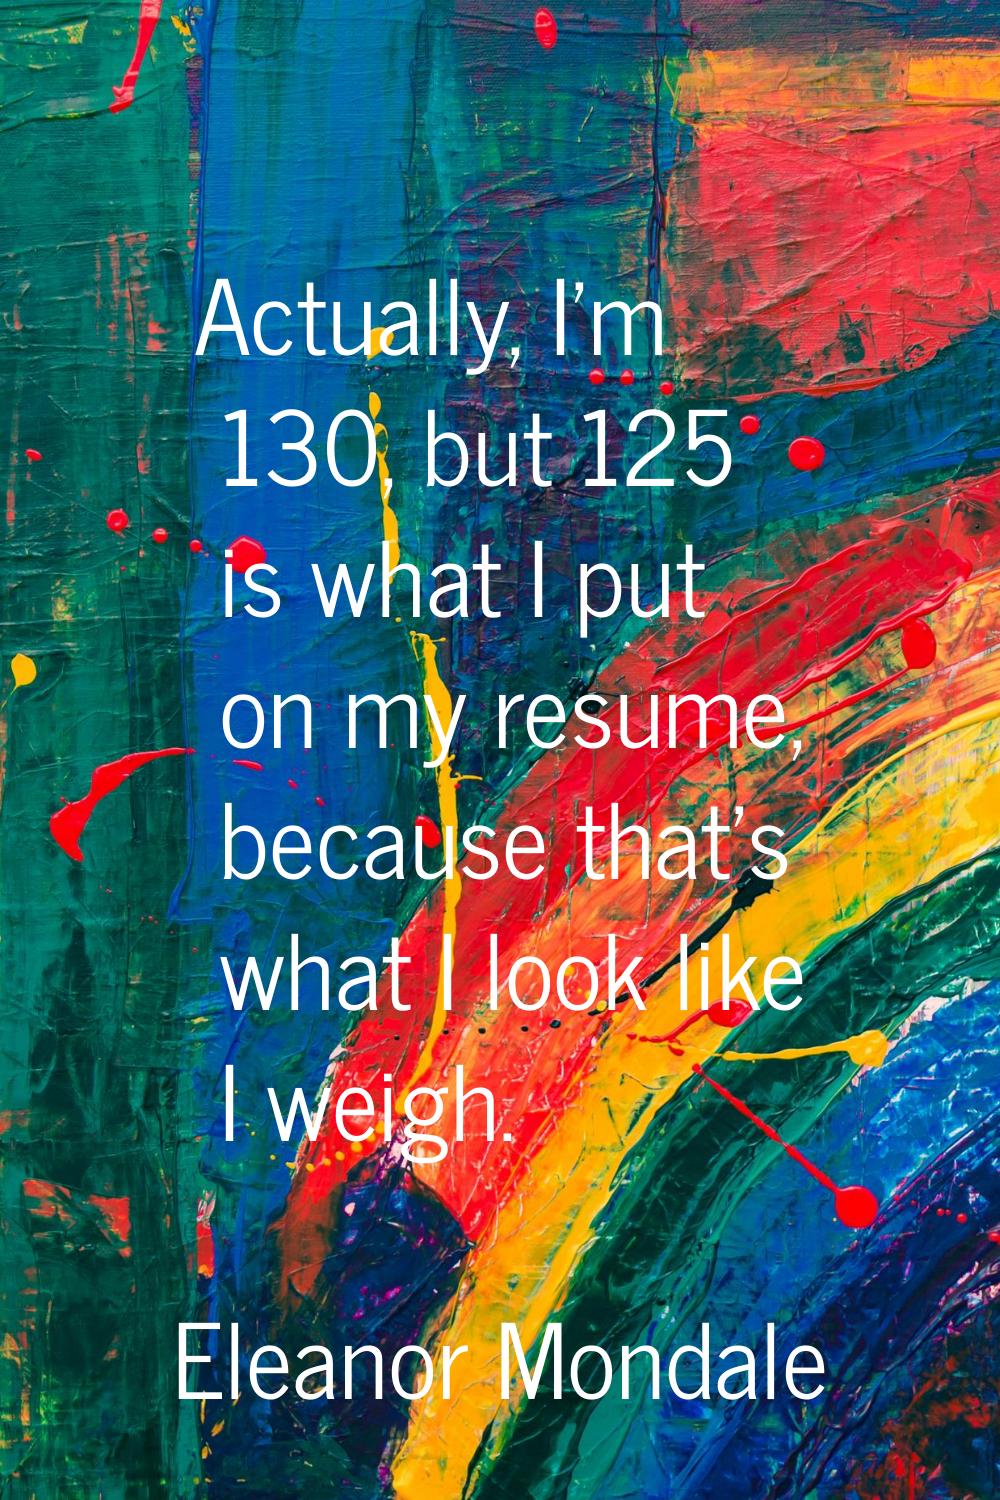 Actually, I'm 130, but 125 is what I put on my resume, because that's what I look like I weigh.